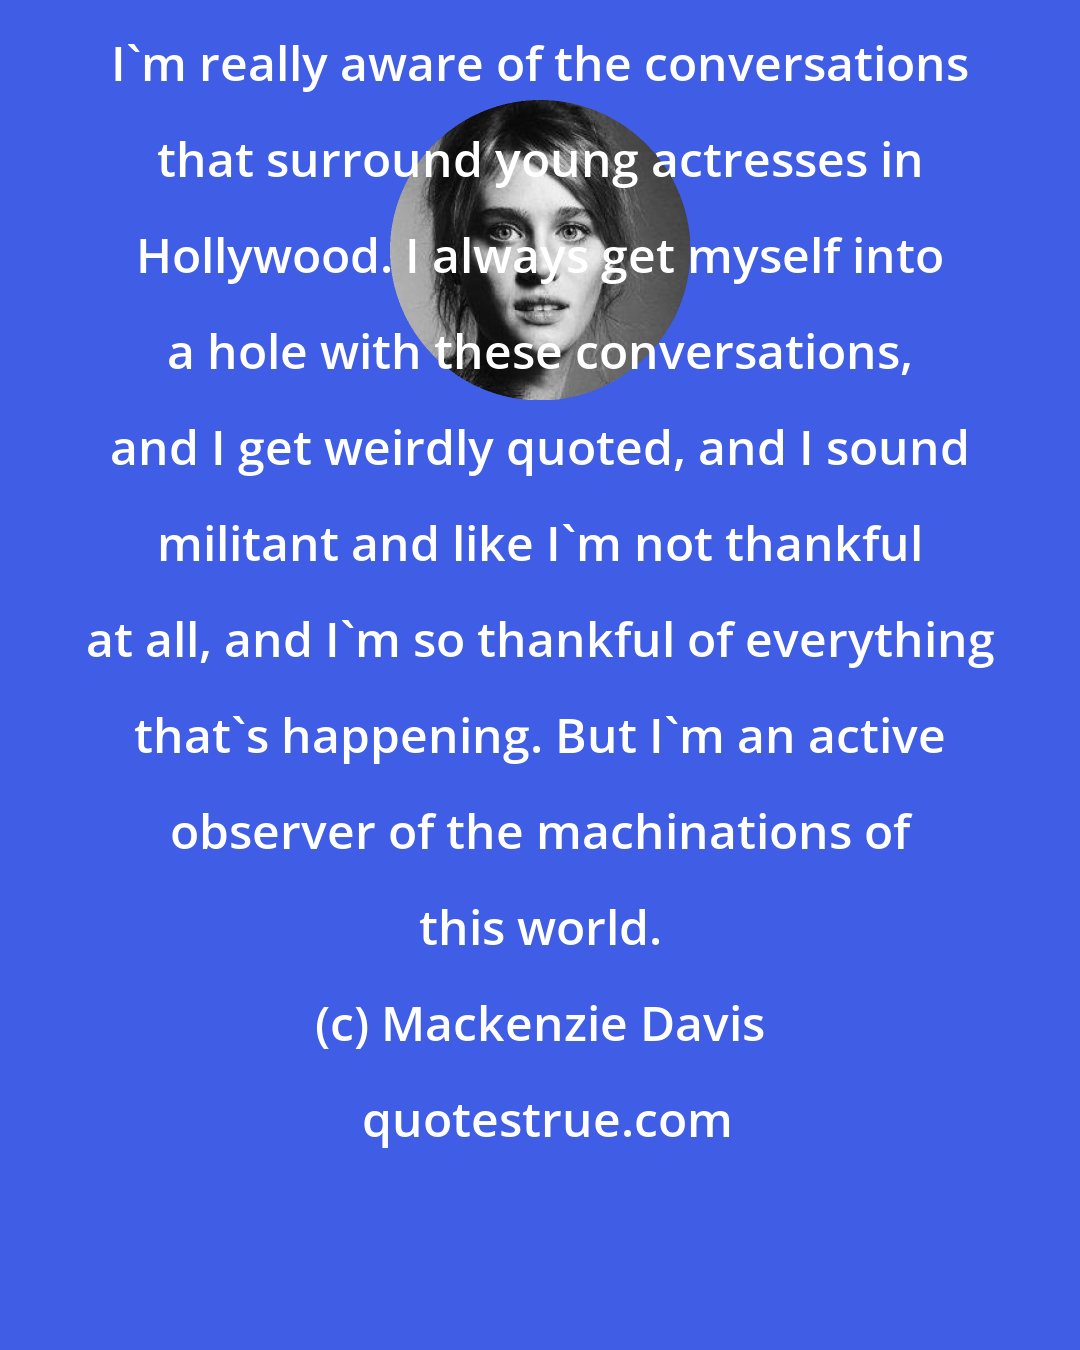 Mackenzie Davis: I'm really aware of the conversations that surround young actresses in Hollywood. I always get myself into a hole with these conversations, and I get weirdly quoted, and I sound militant and like I'm not thankful at all, and I'm so thankful of everything that's happening. But I'm an active observer of the machinations of this world.